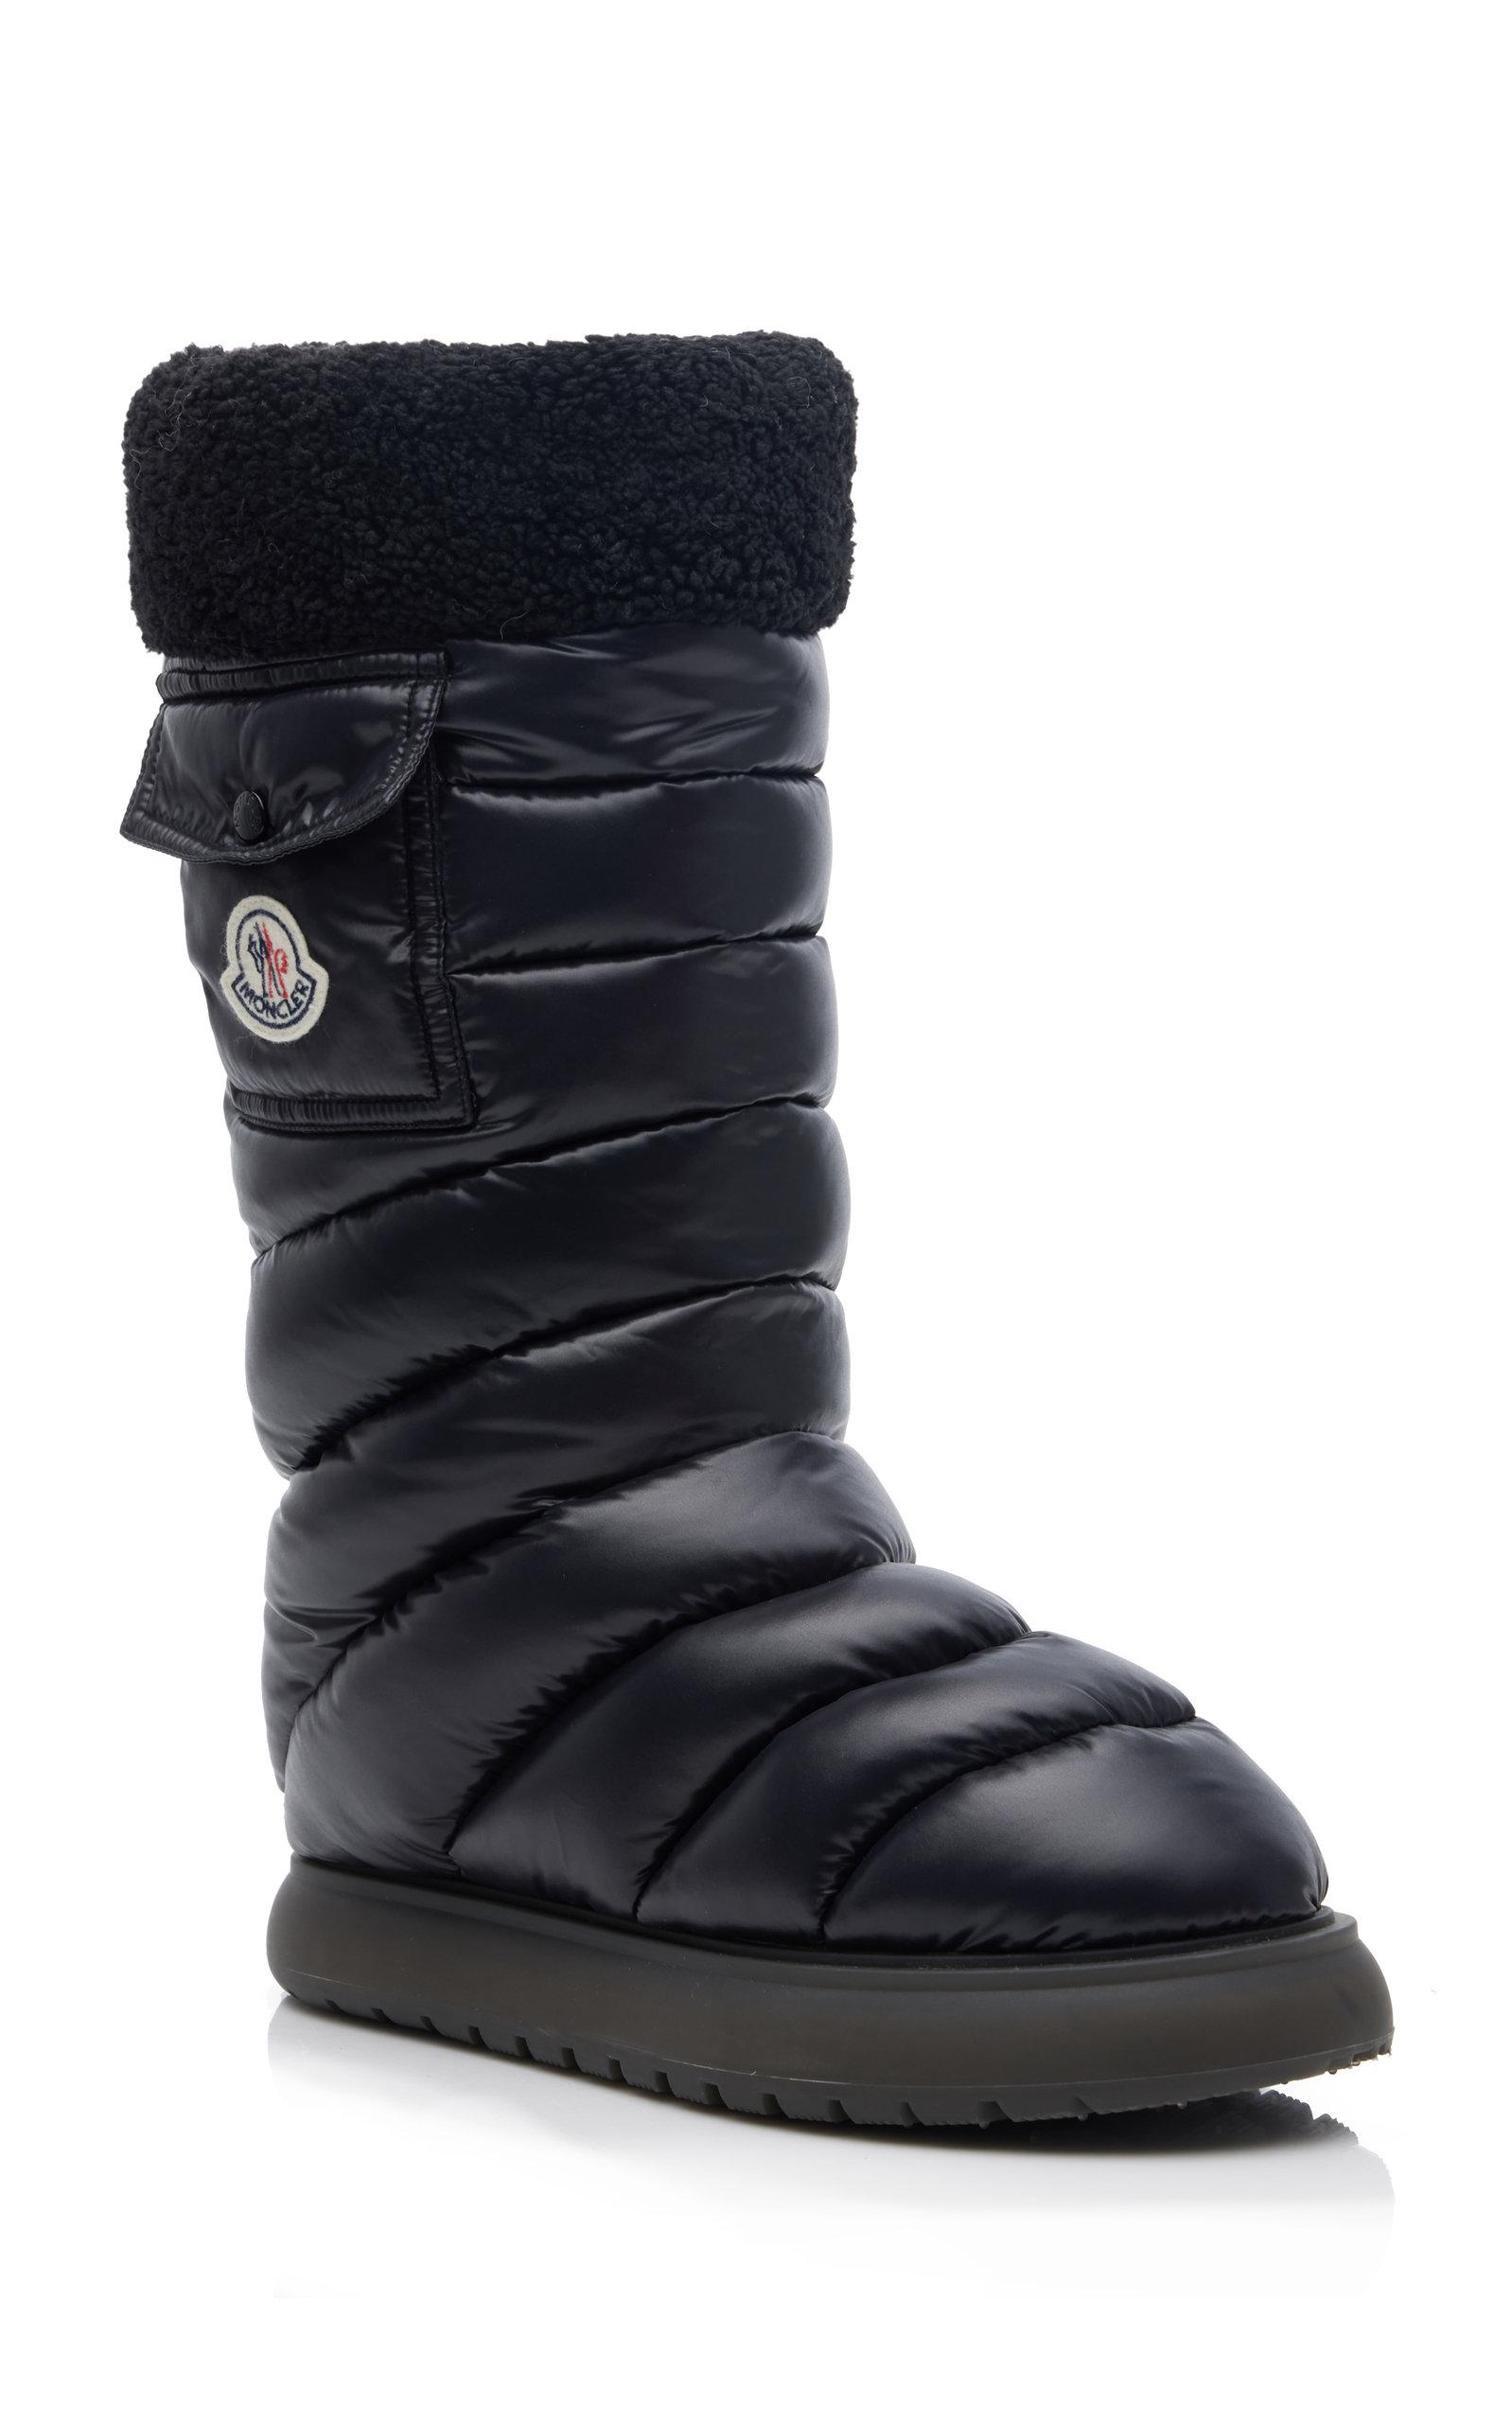 Moncler Gaia Pocket Snow Boots in Black | Lyst